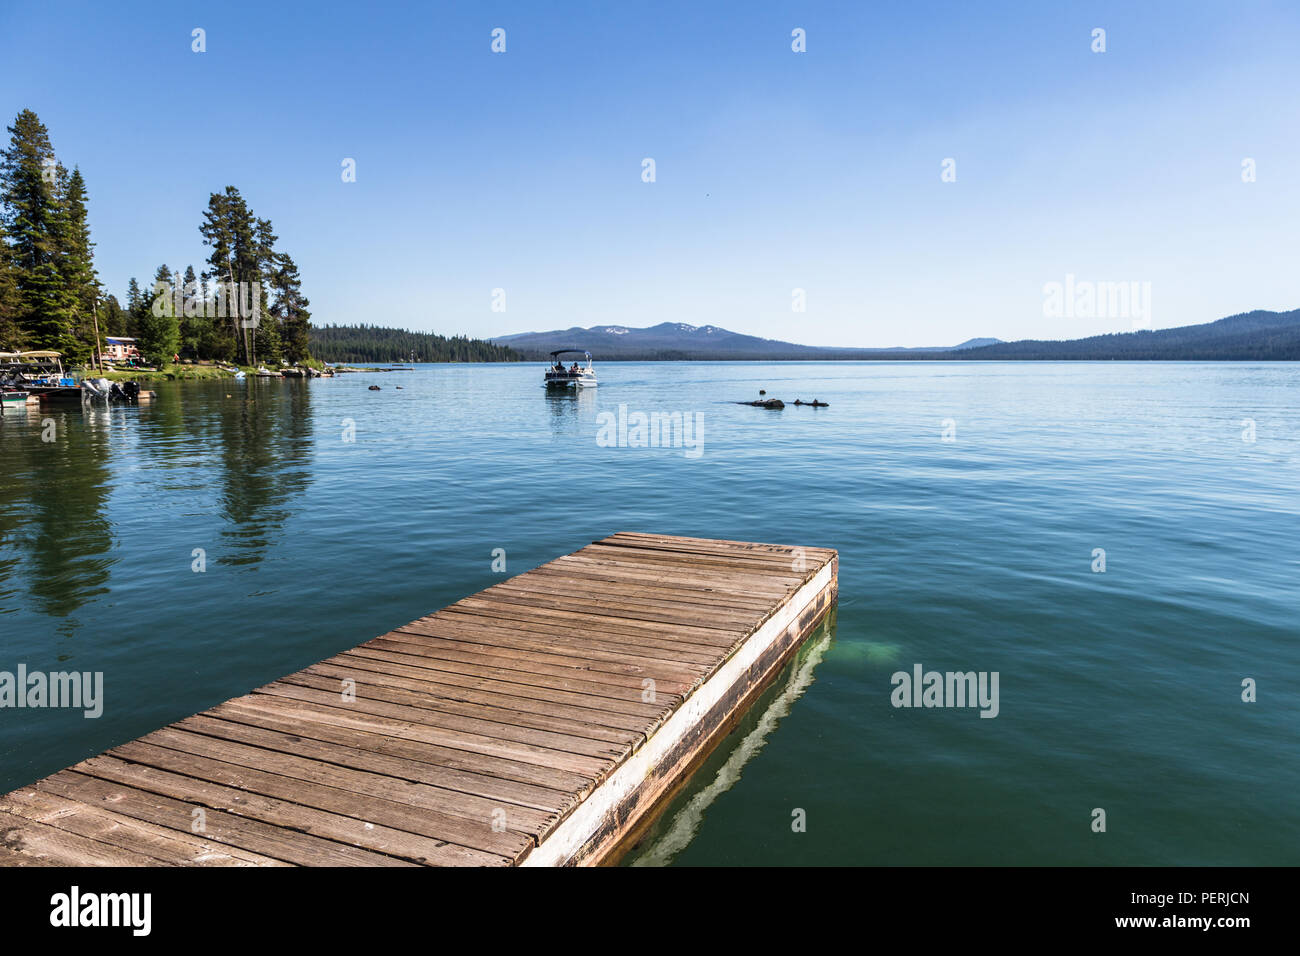 Idyllic view of the Diamond lake in the Cascades mountains range in Oregon on the USA west coast on a sunny summer day Stock Photo